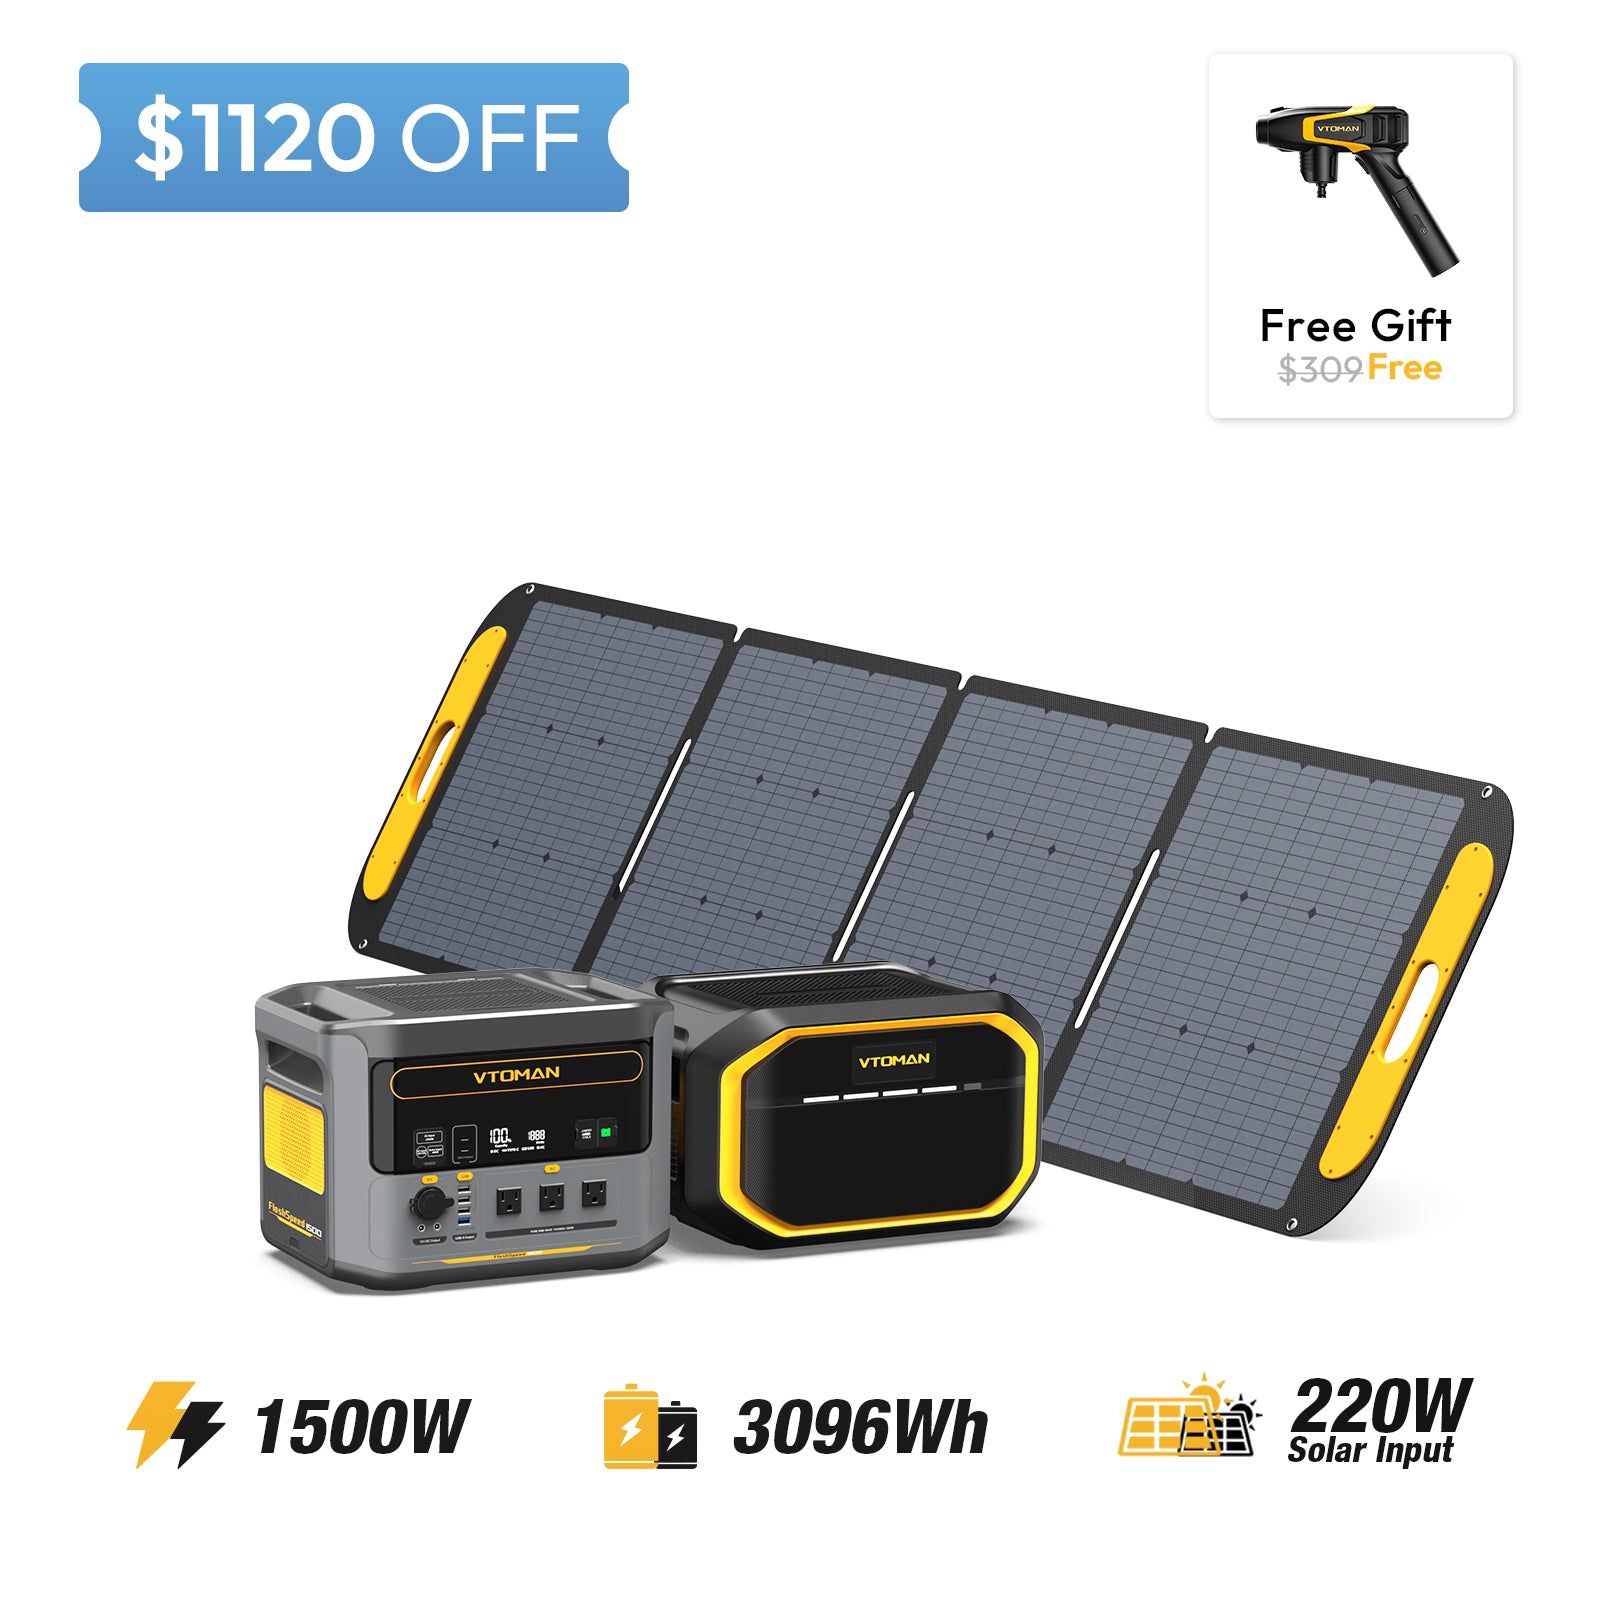 FlashSpeed 1500-1548Wh extra battery-220W pro solar panel save $1120 in summer sale